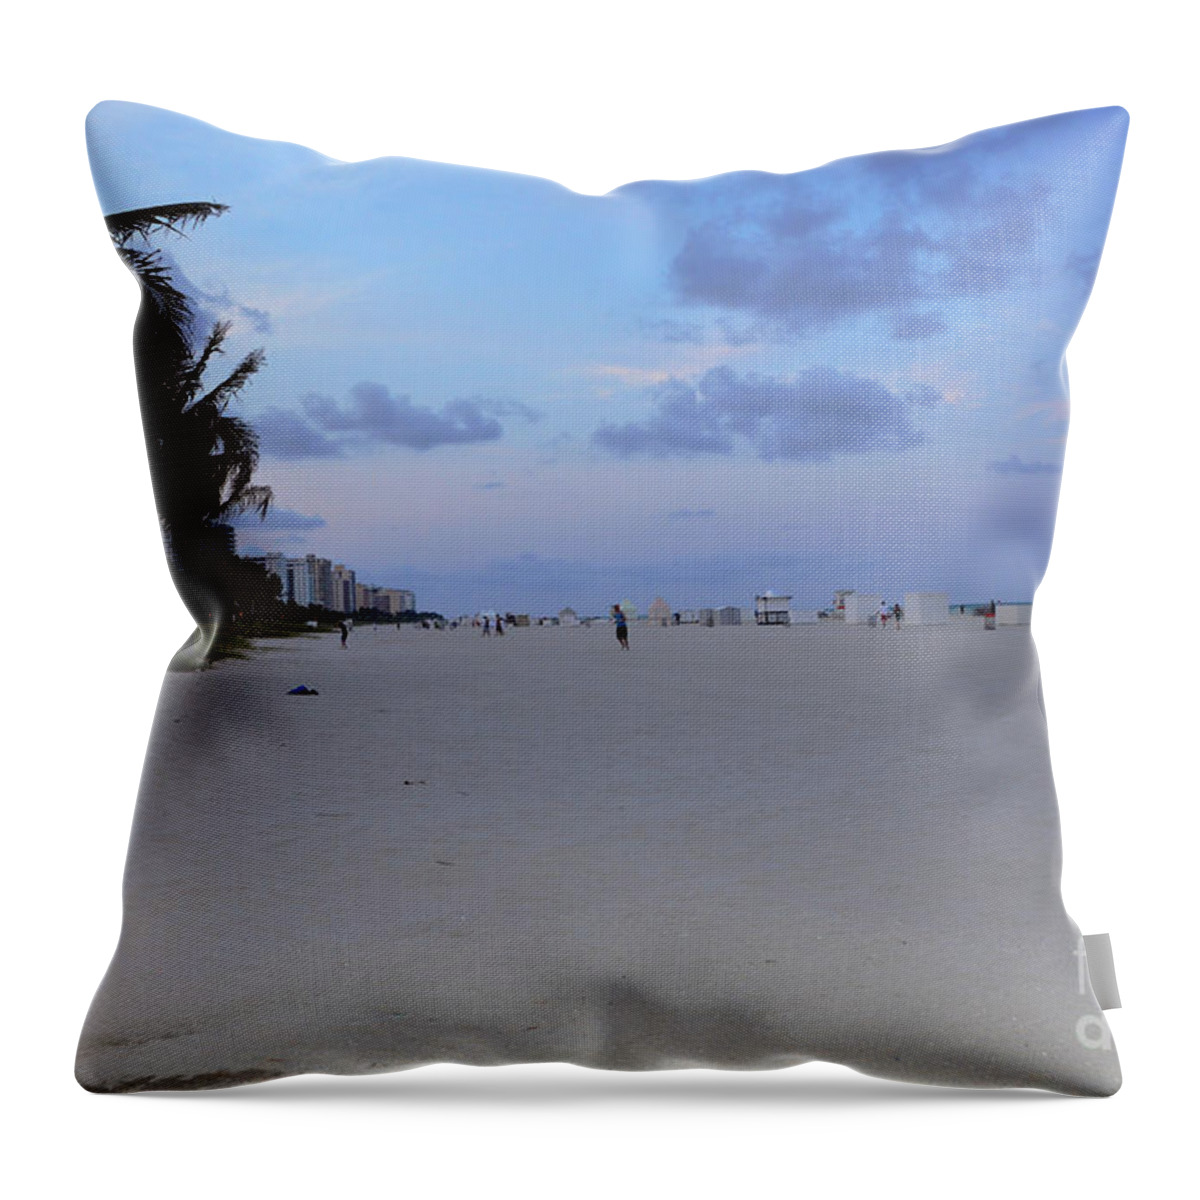 South Beach Throw Pillow featuring the photograph South Beach by Pravine Chester